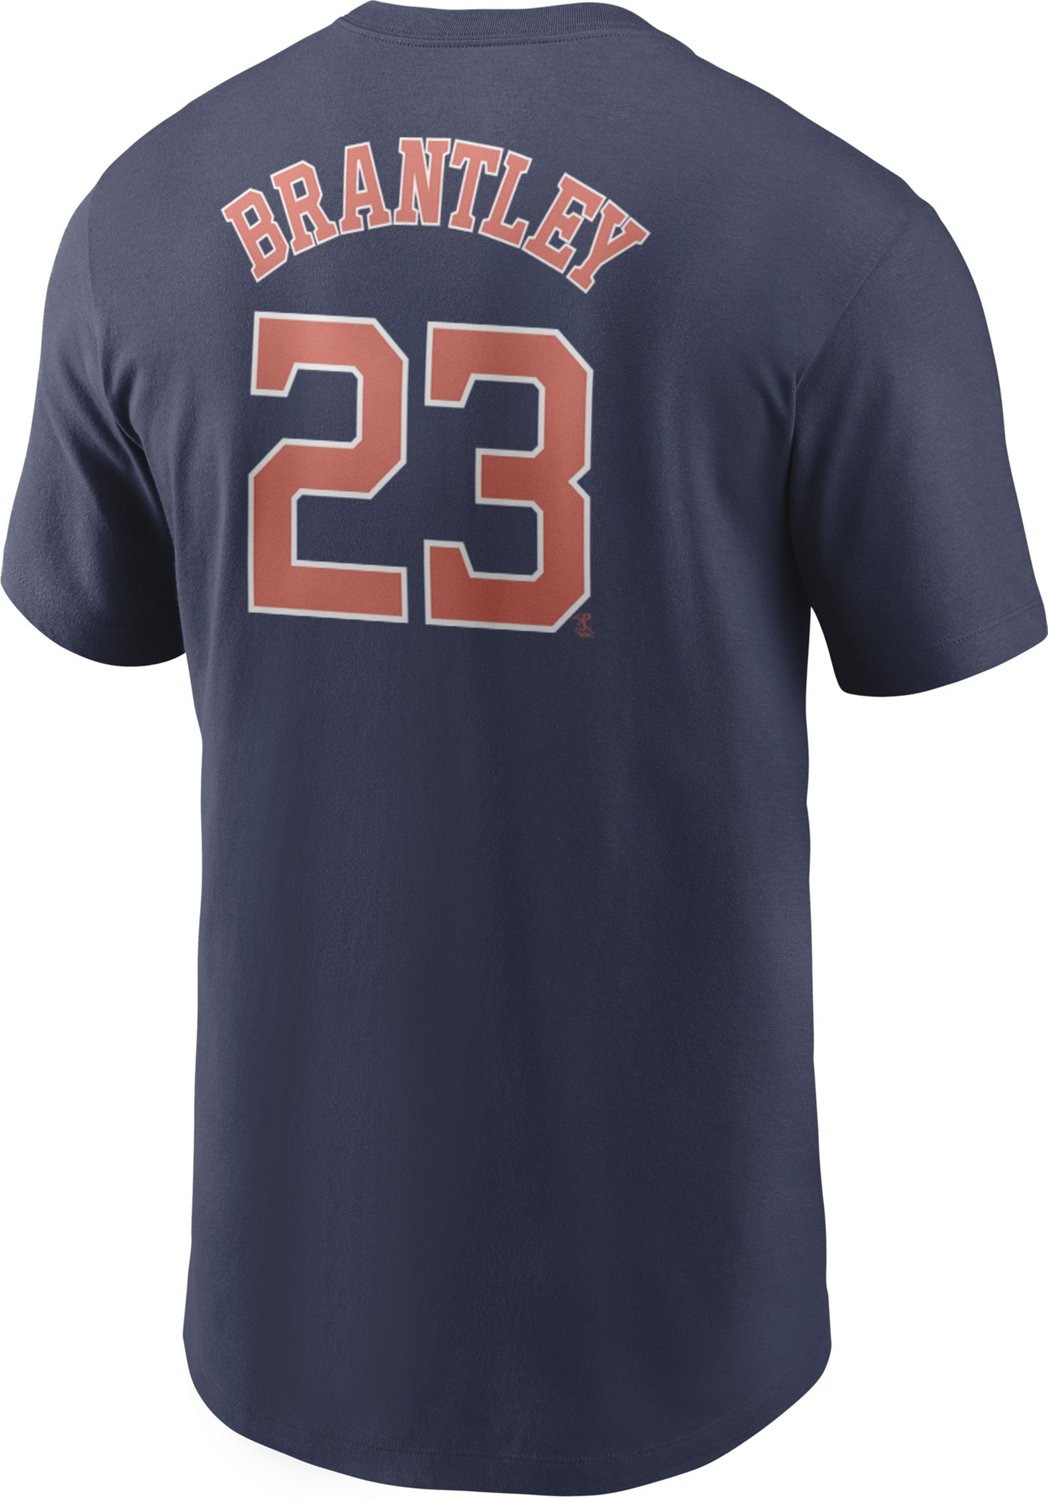 HOT HOT!! Houston Astros Michael Brantley #23 Name & Number T-Shirt Gift Fan